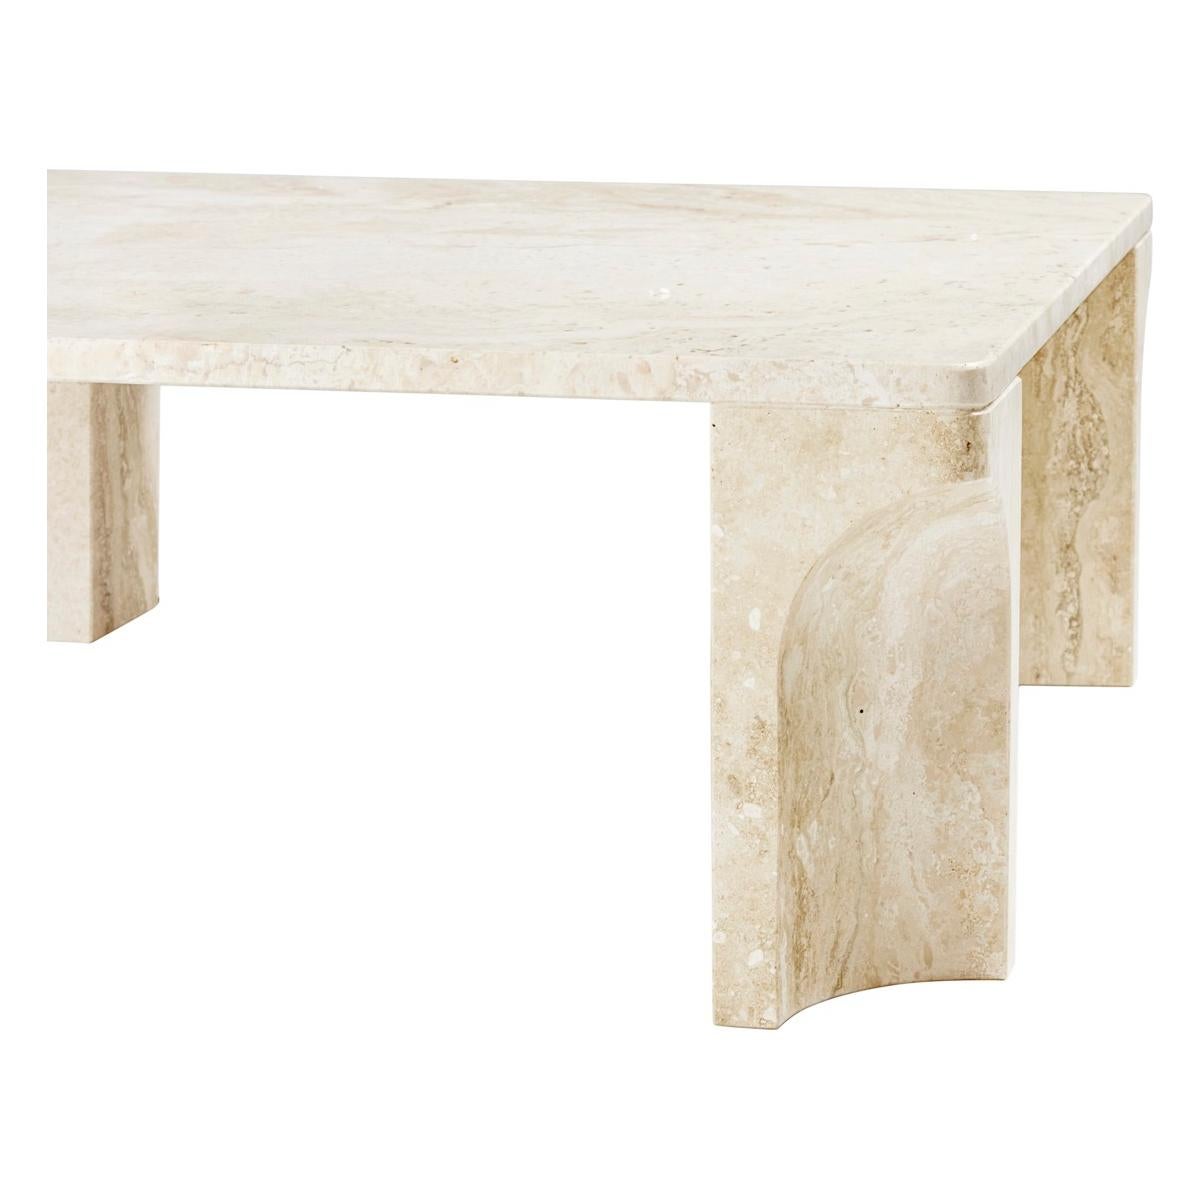 The Doric Coffee Table by GamFratesi takes its name from the Doric order of ancient Greek – and later Roman – architecture. The oldest and least ornamental of the three Classical orders, Doric architecture is characterized by restraint, symmetry,